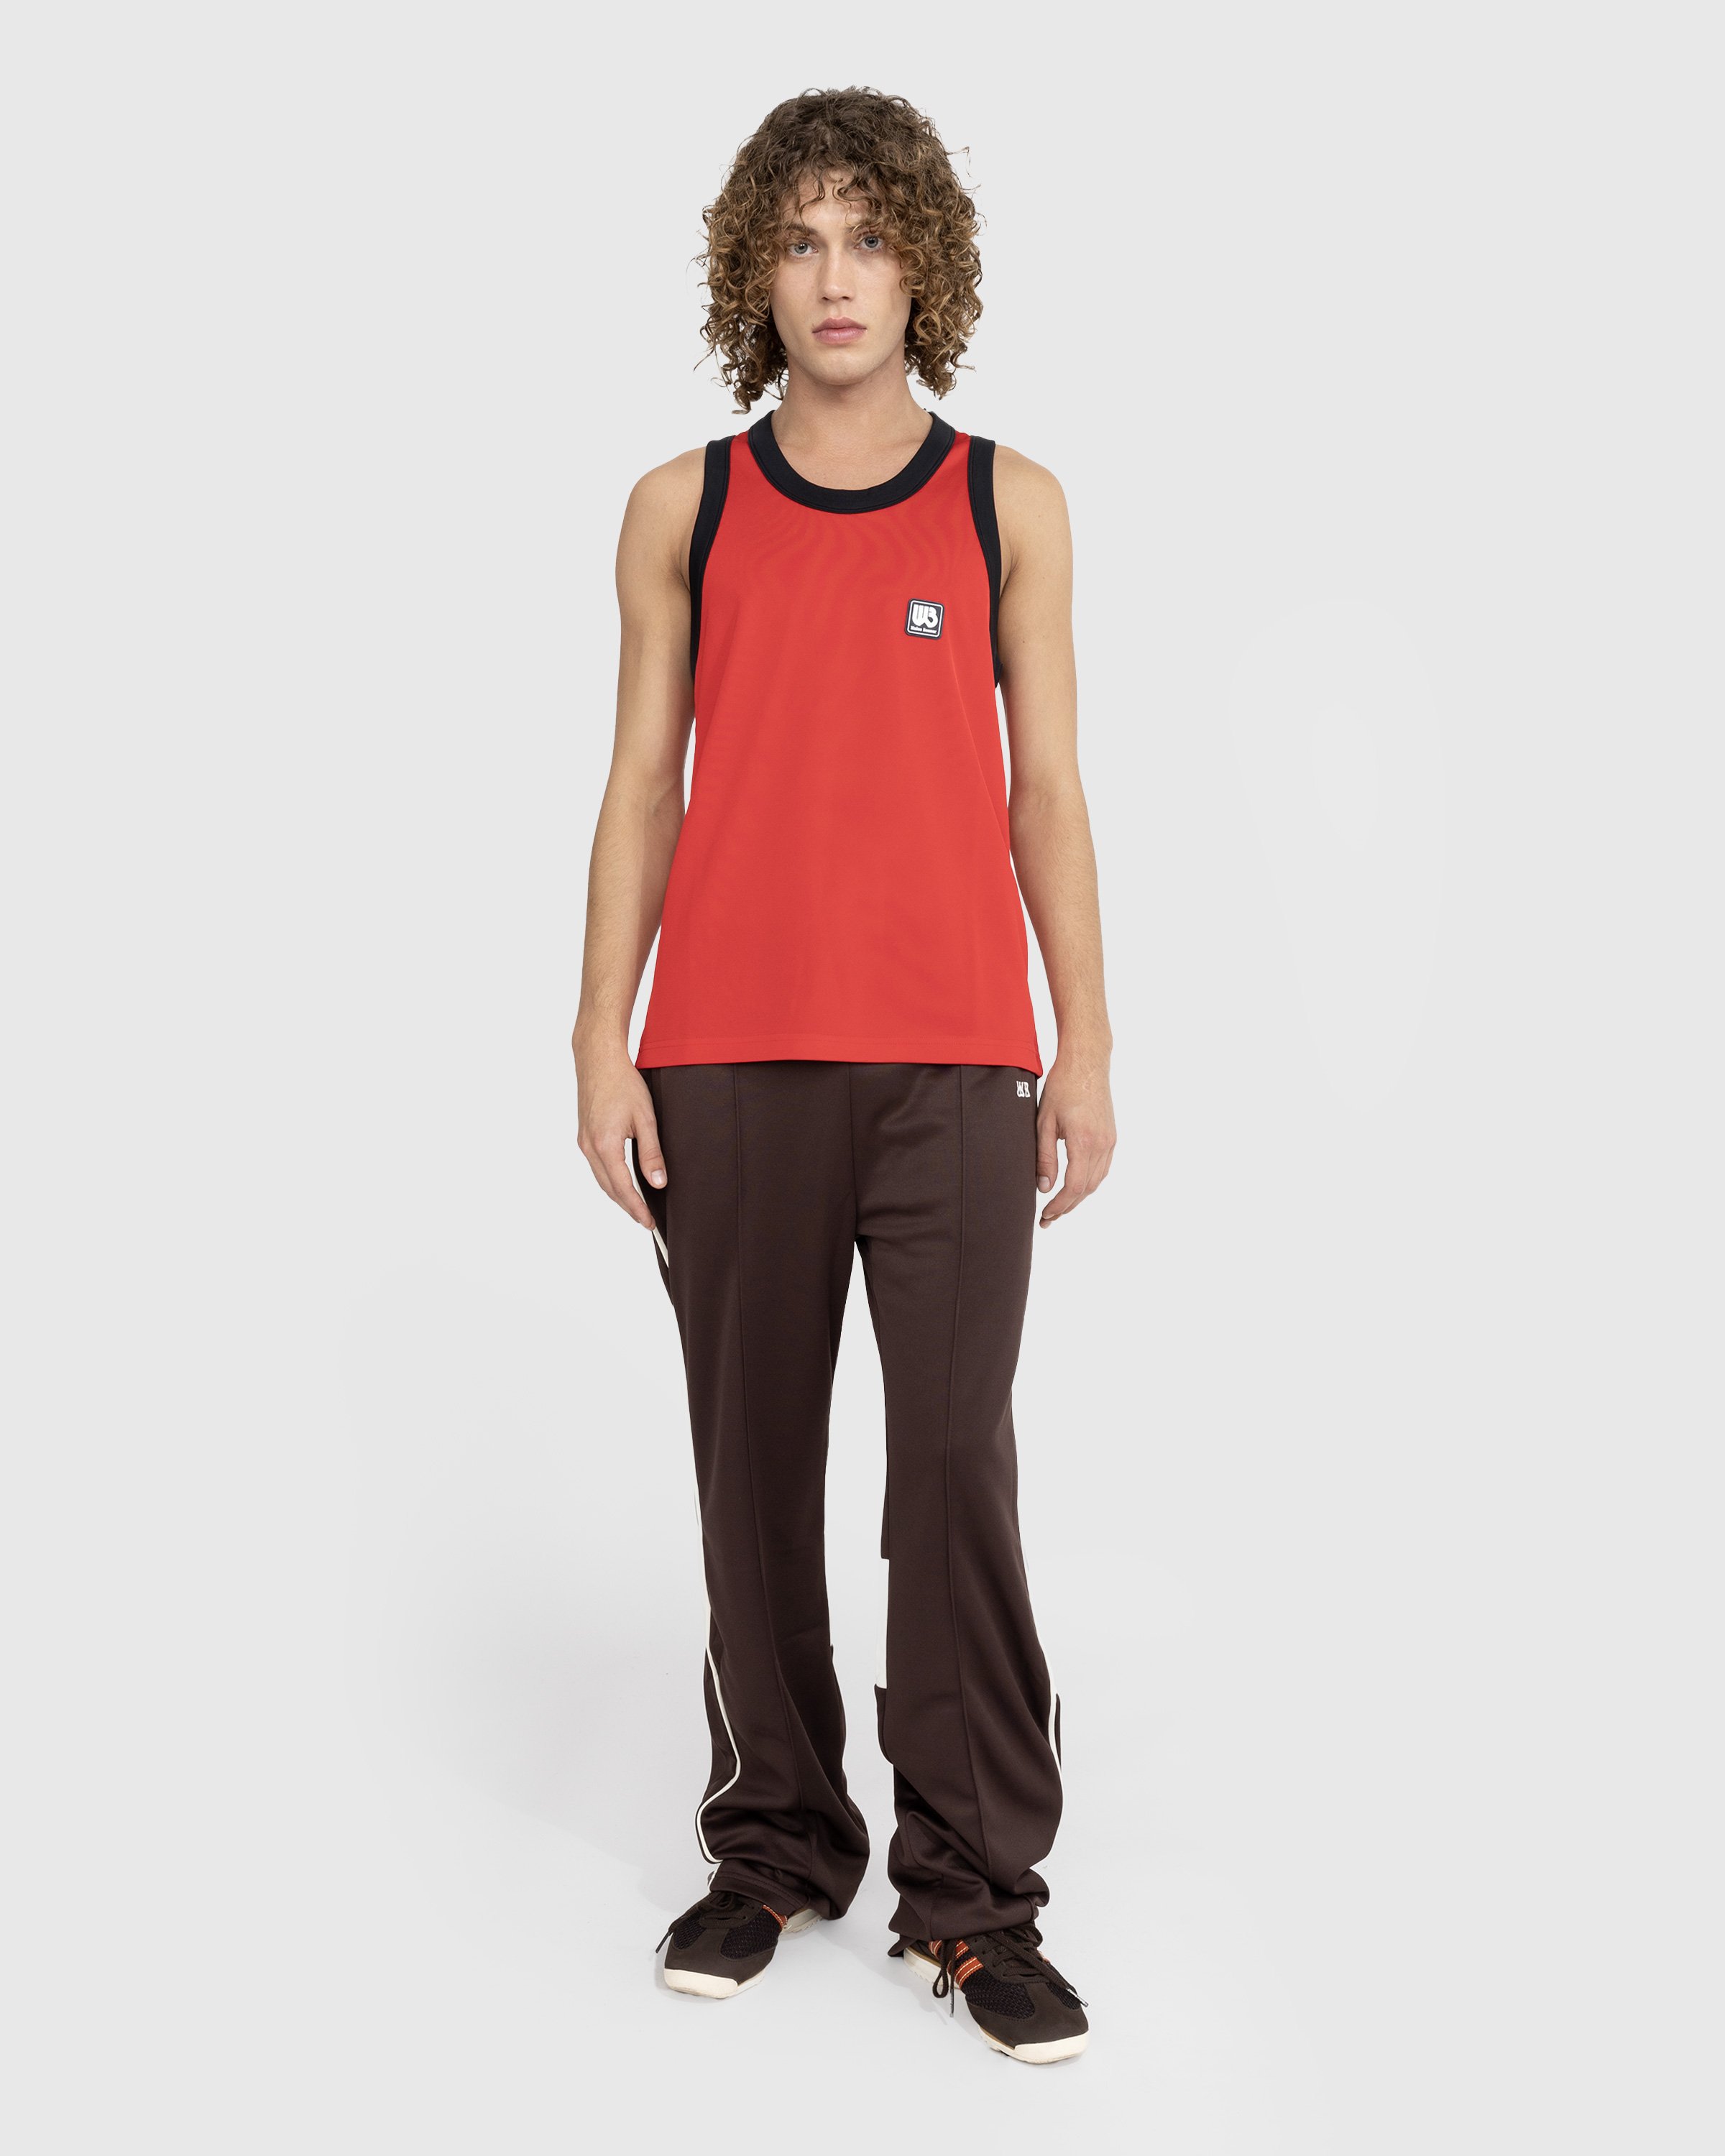 Wales Bonner - Diop Tank Top Red/Black - Clothing - Red - Image 3